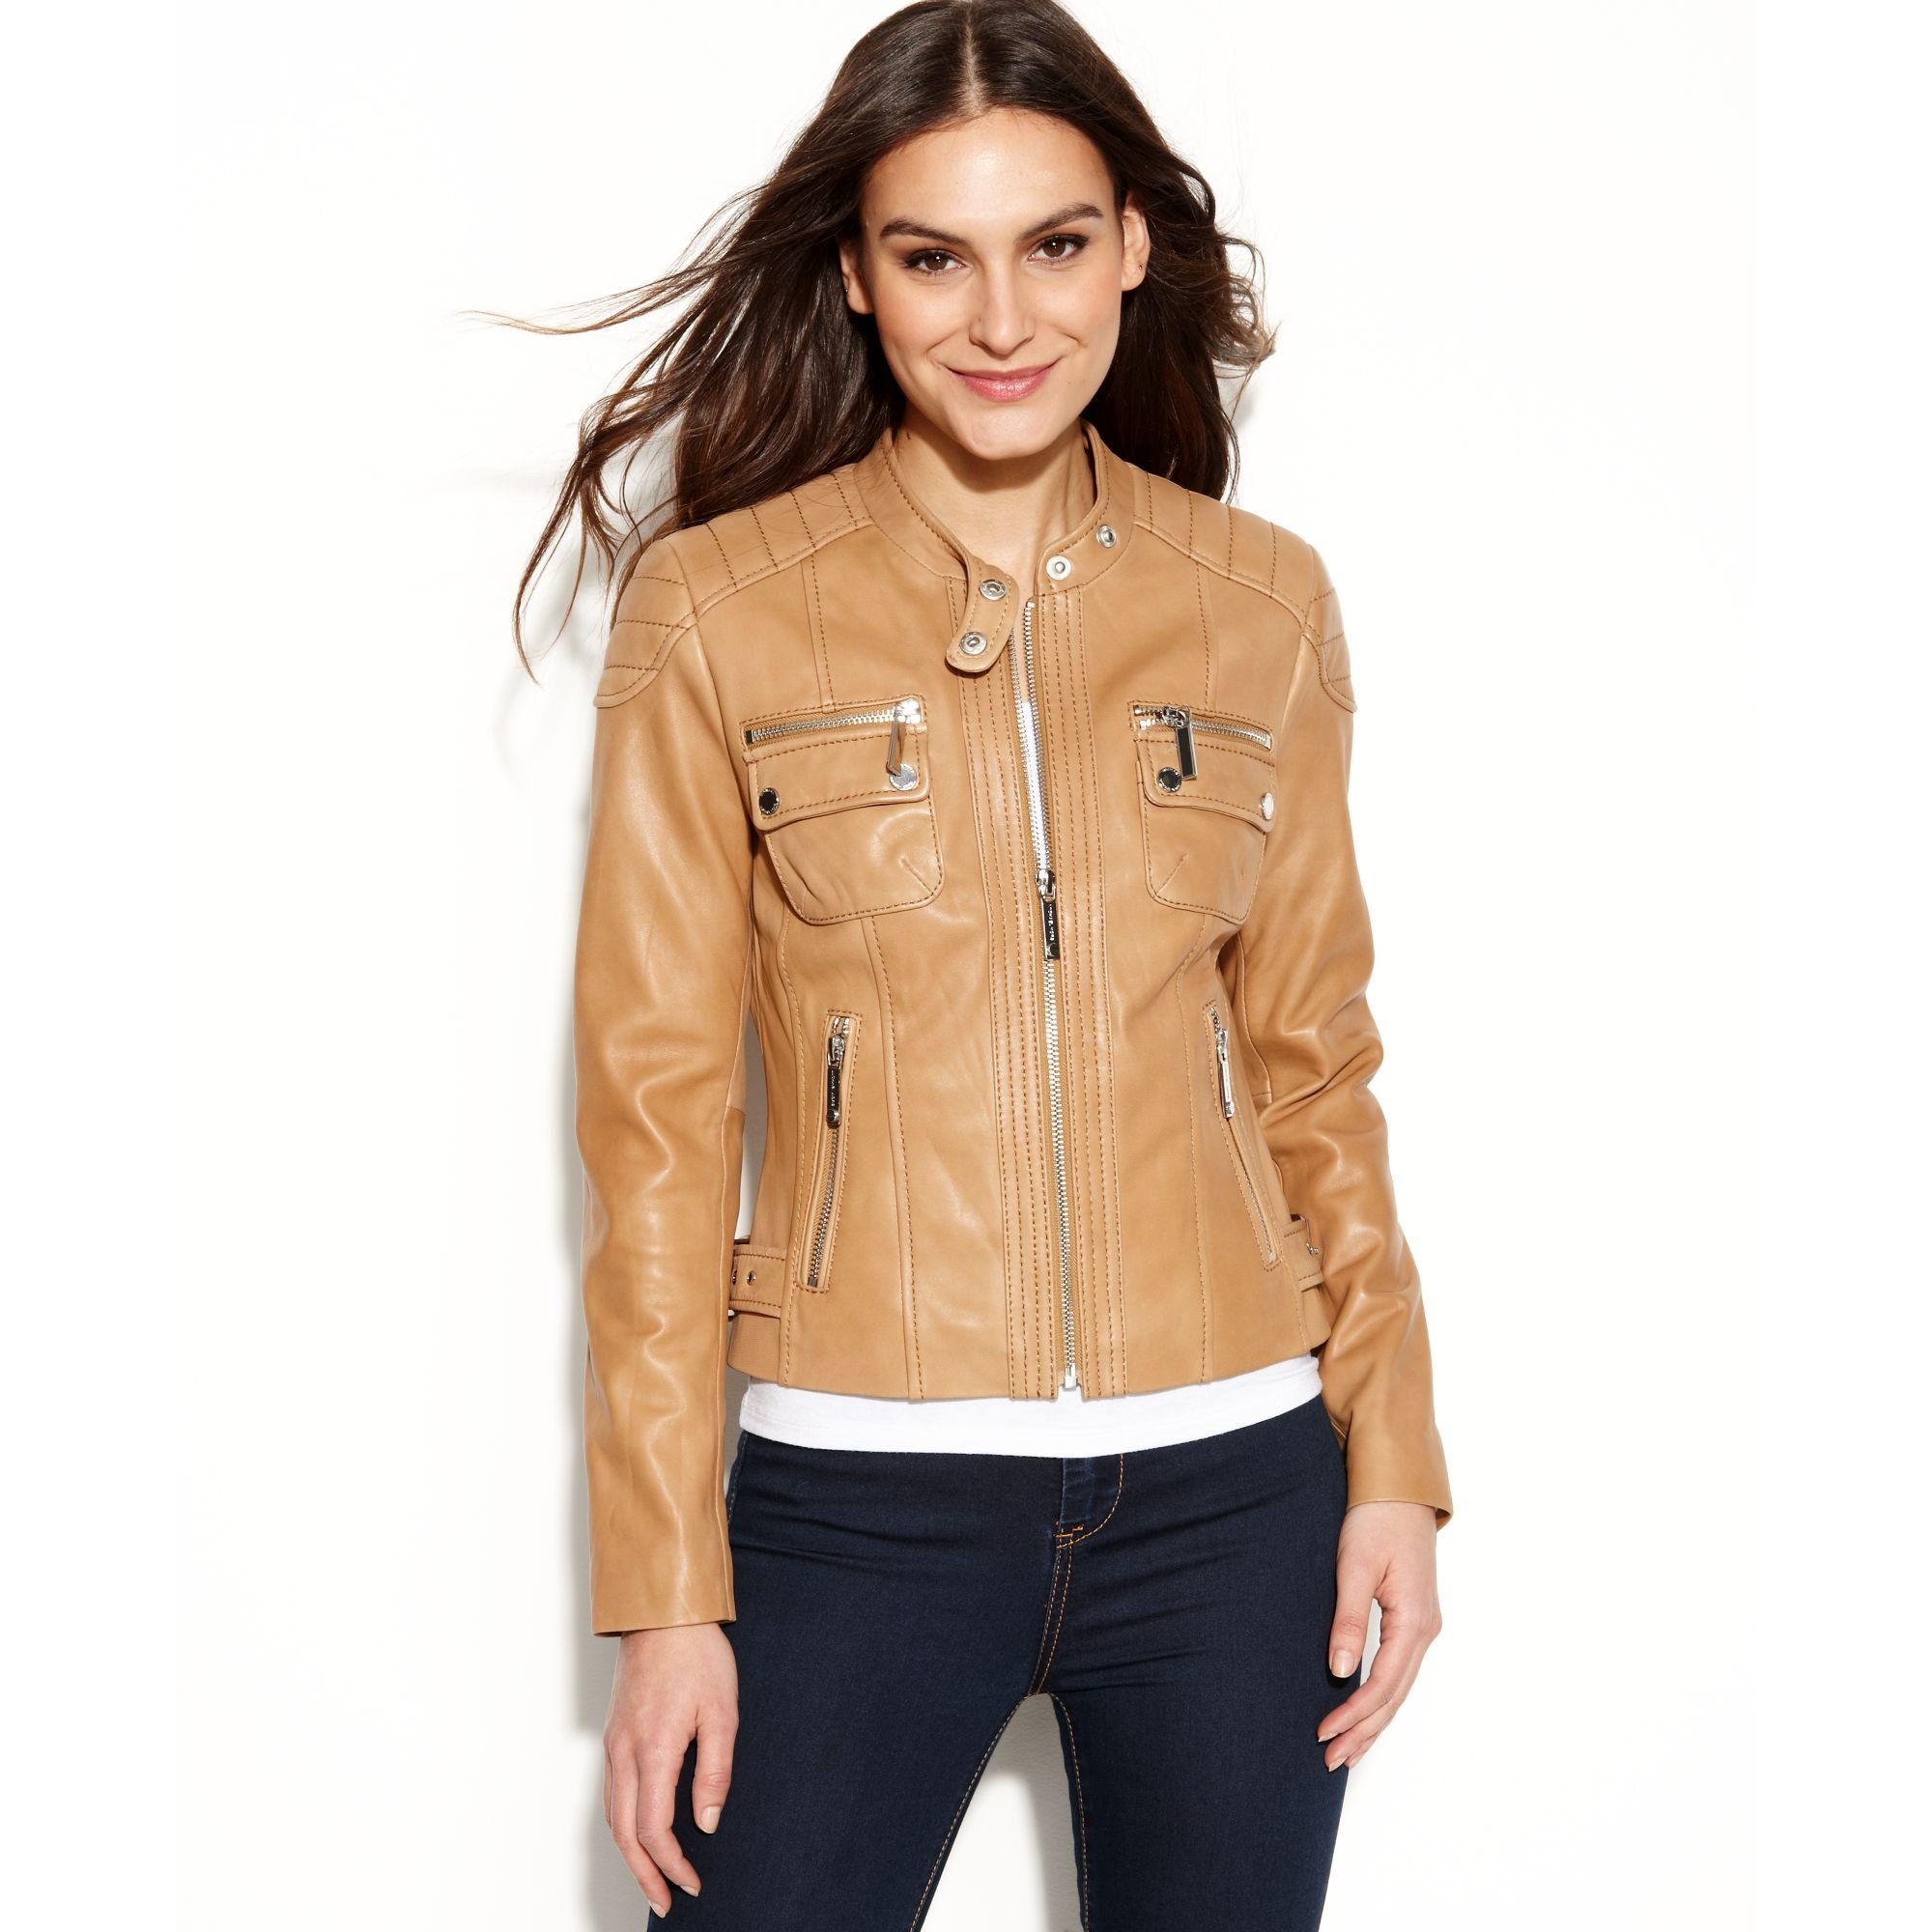 Lyst - Michael Kors Quilted Detail Leather Motorcycle Jacket in Brown